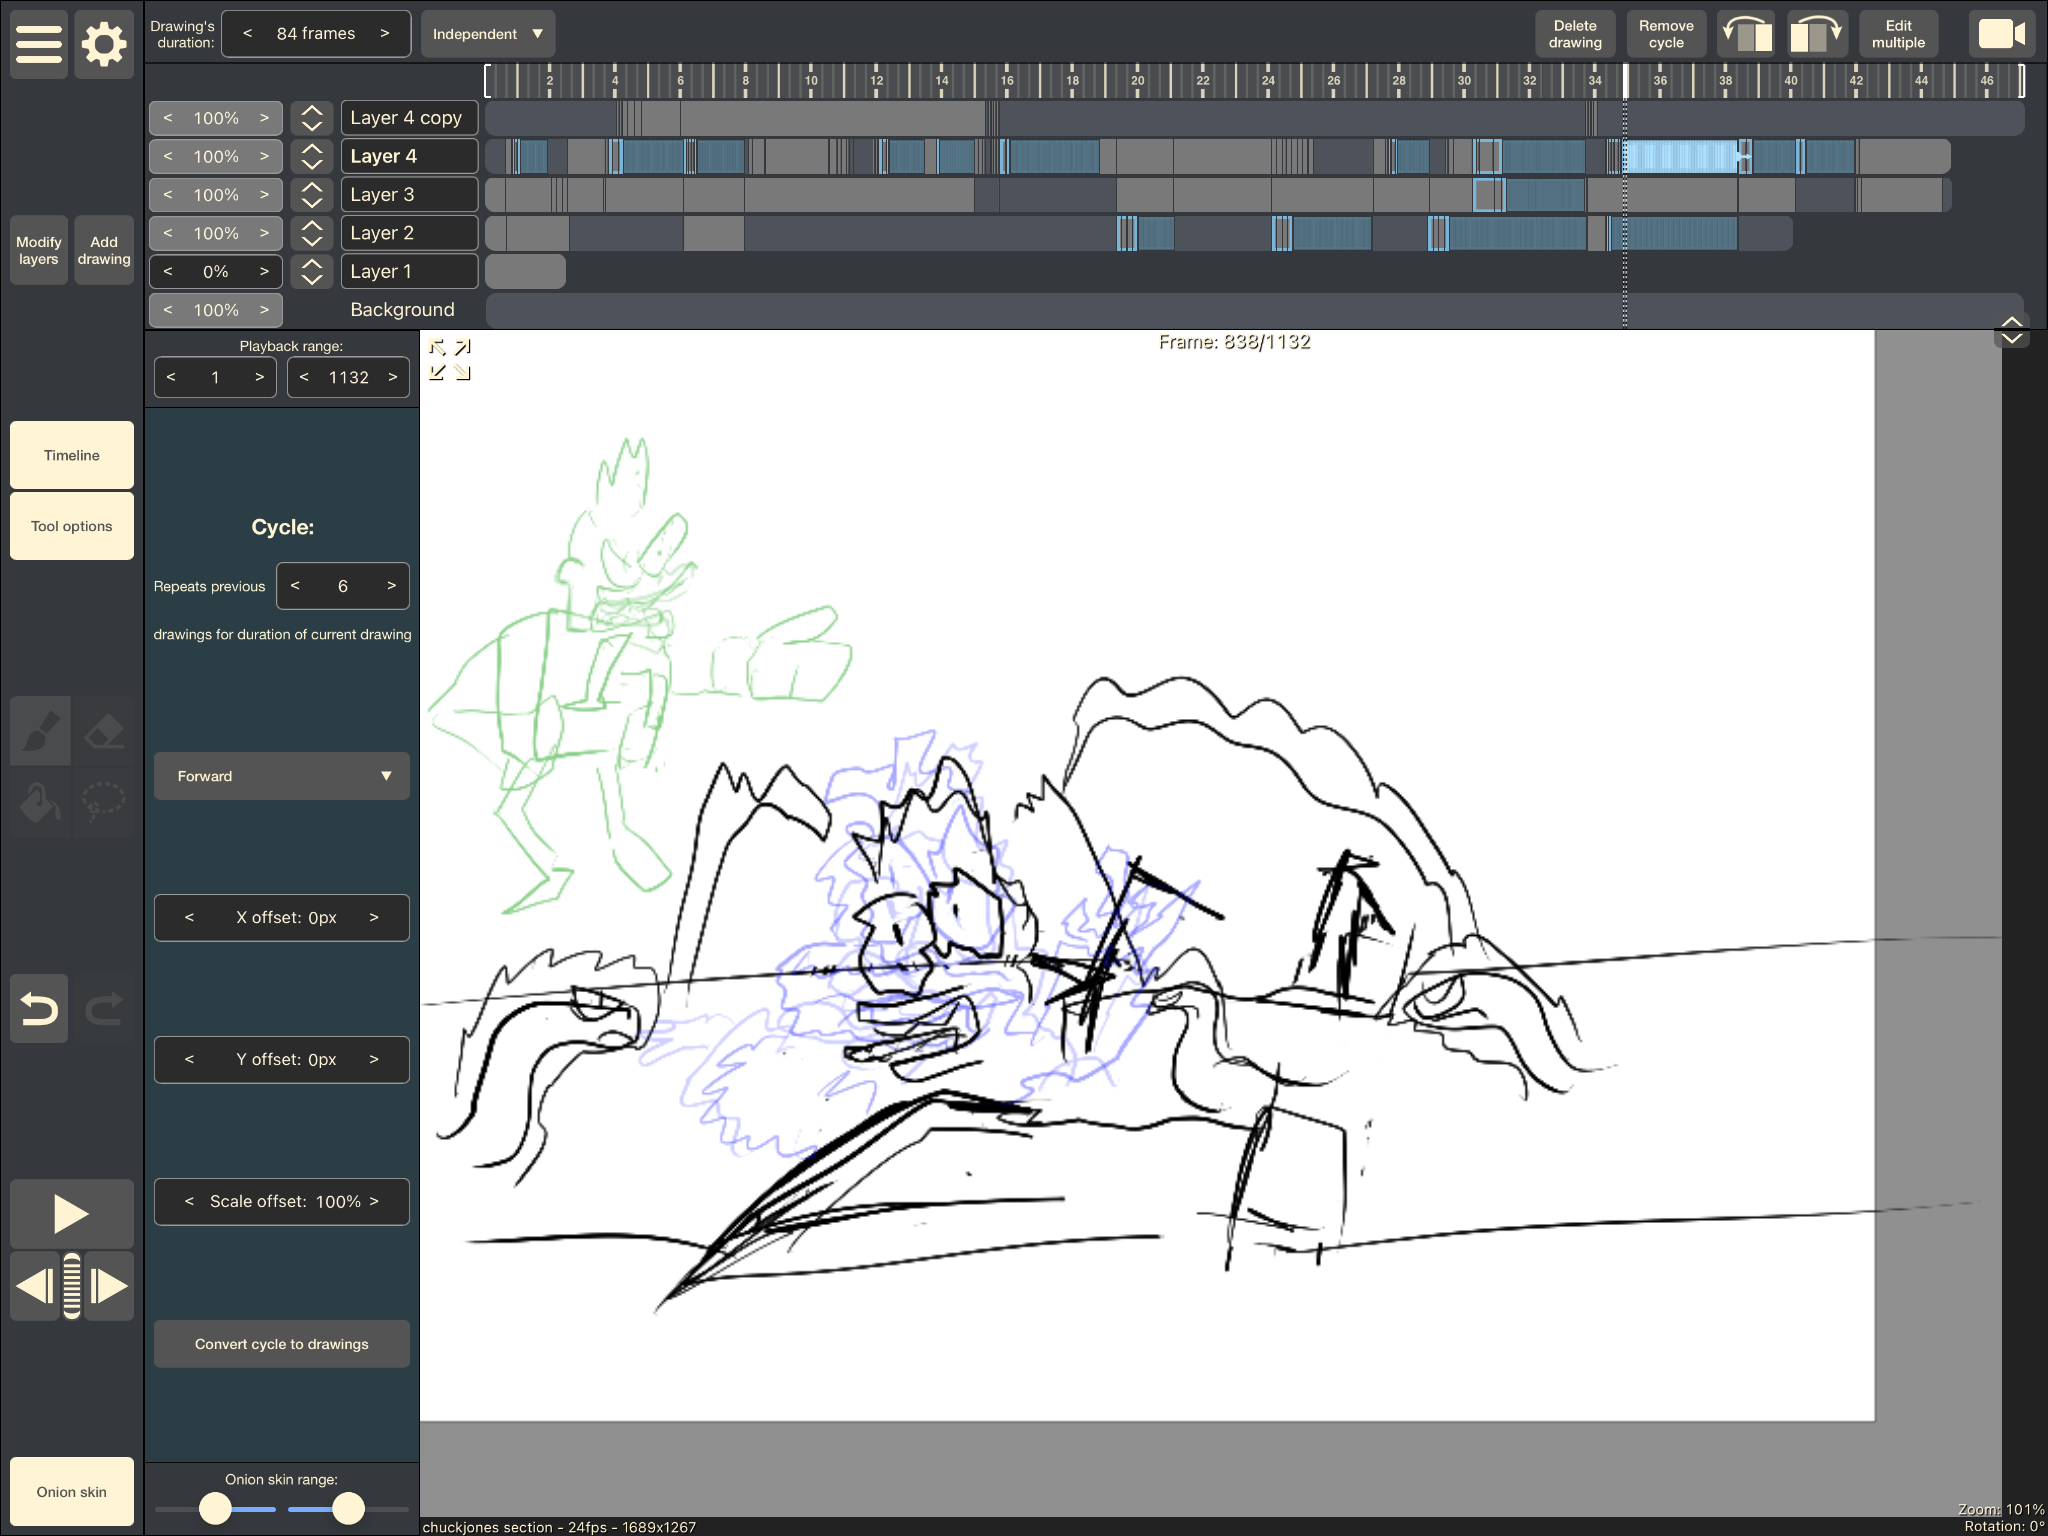 image: Screenshot showing 2D animation work in RoughAnimator with onion skin.